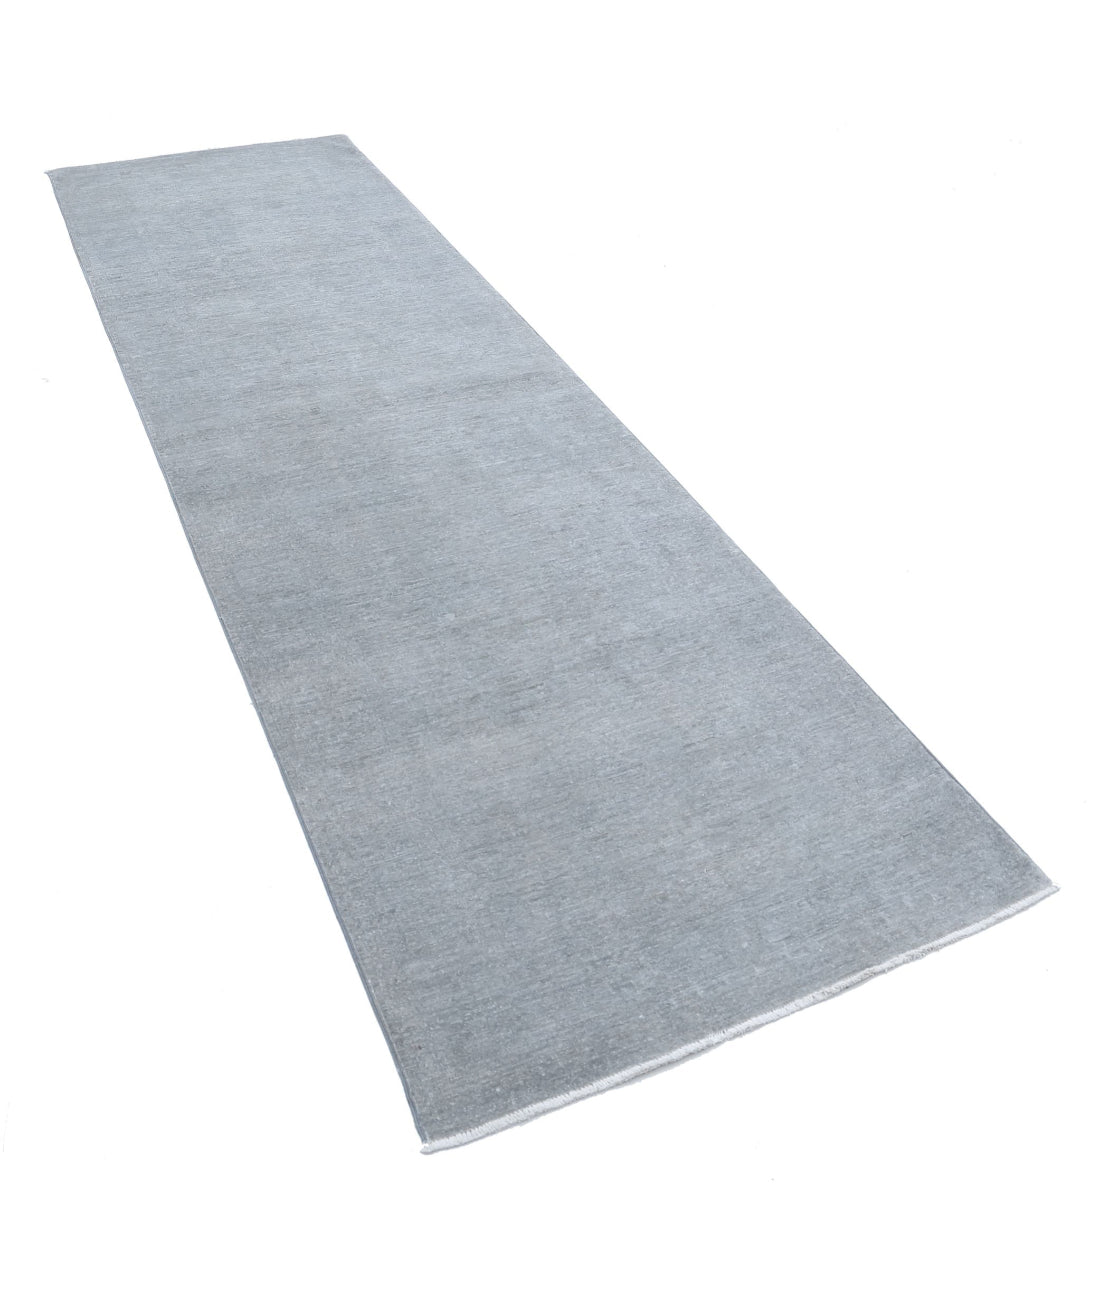 Overdye 3'2'' X 10'7'' Hand-Knotted Wool Rug 3'2'' x 10'7'' (95 X 318) / Grey / N/A